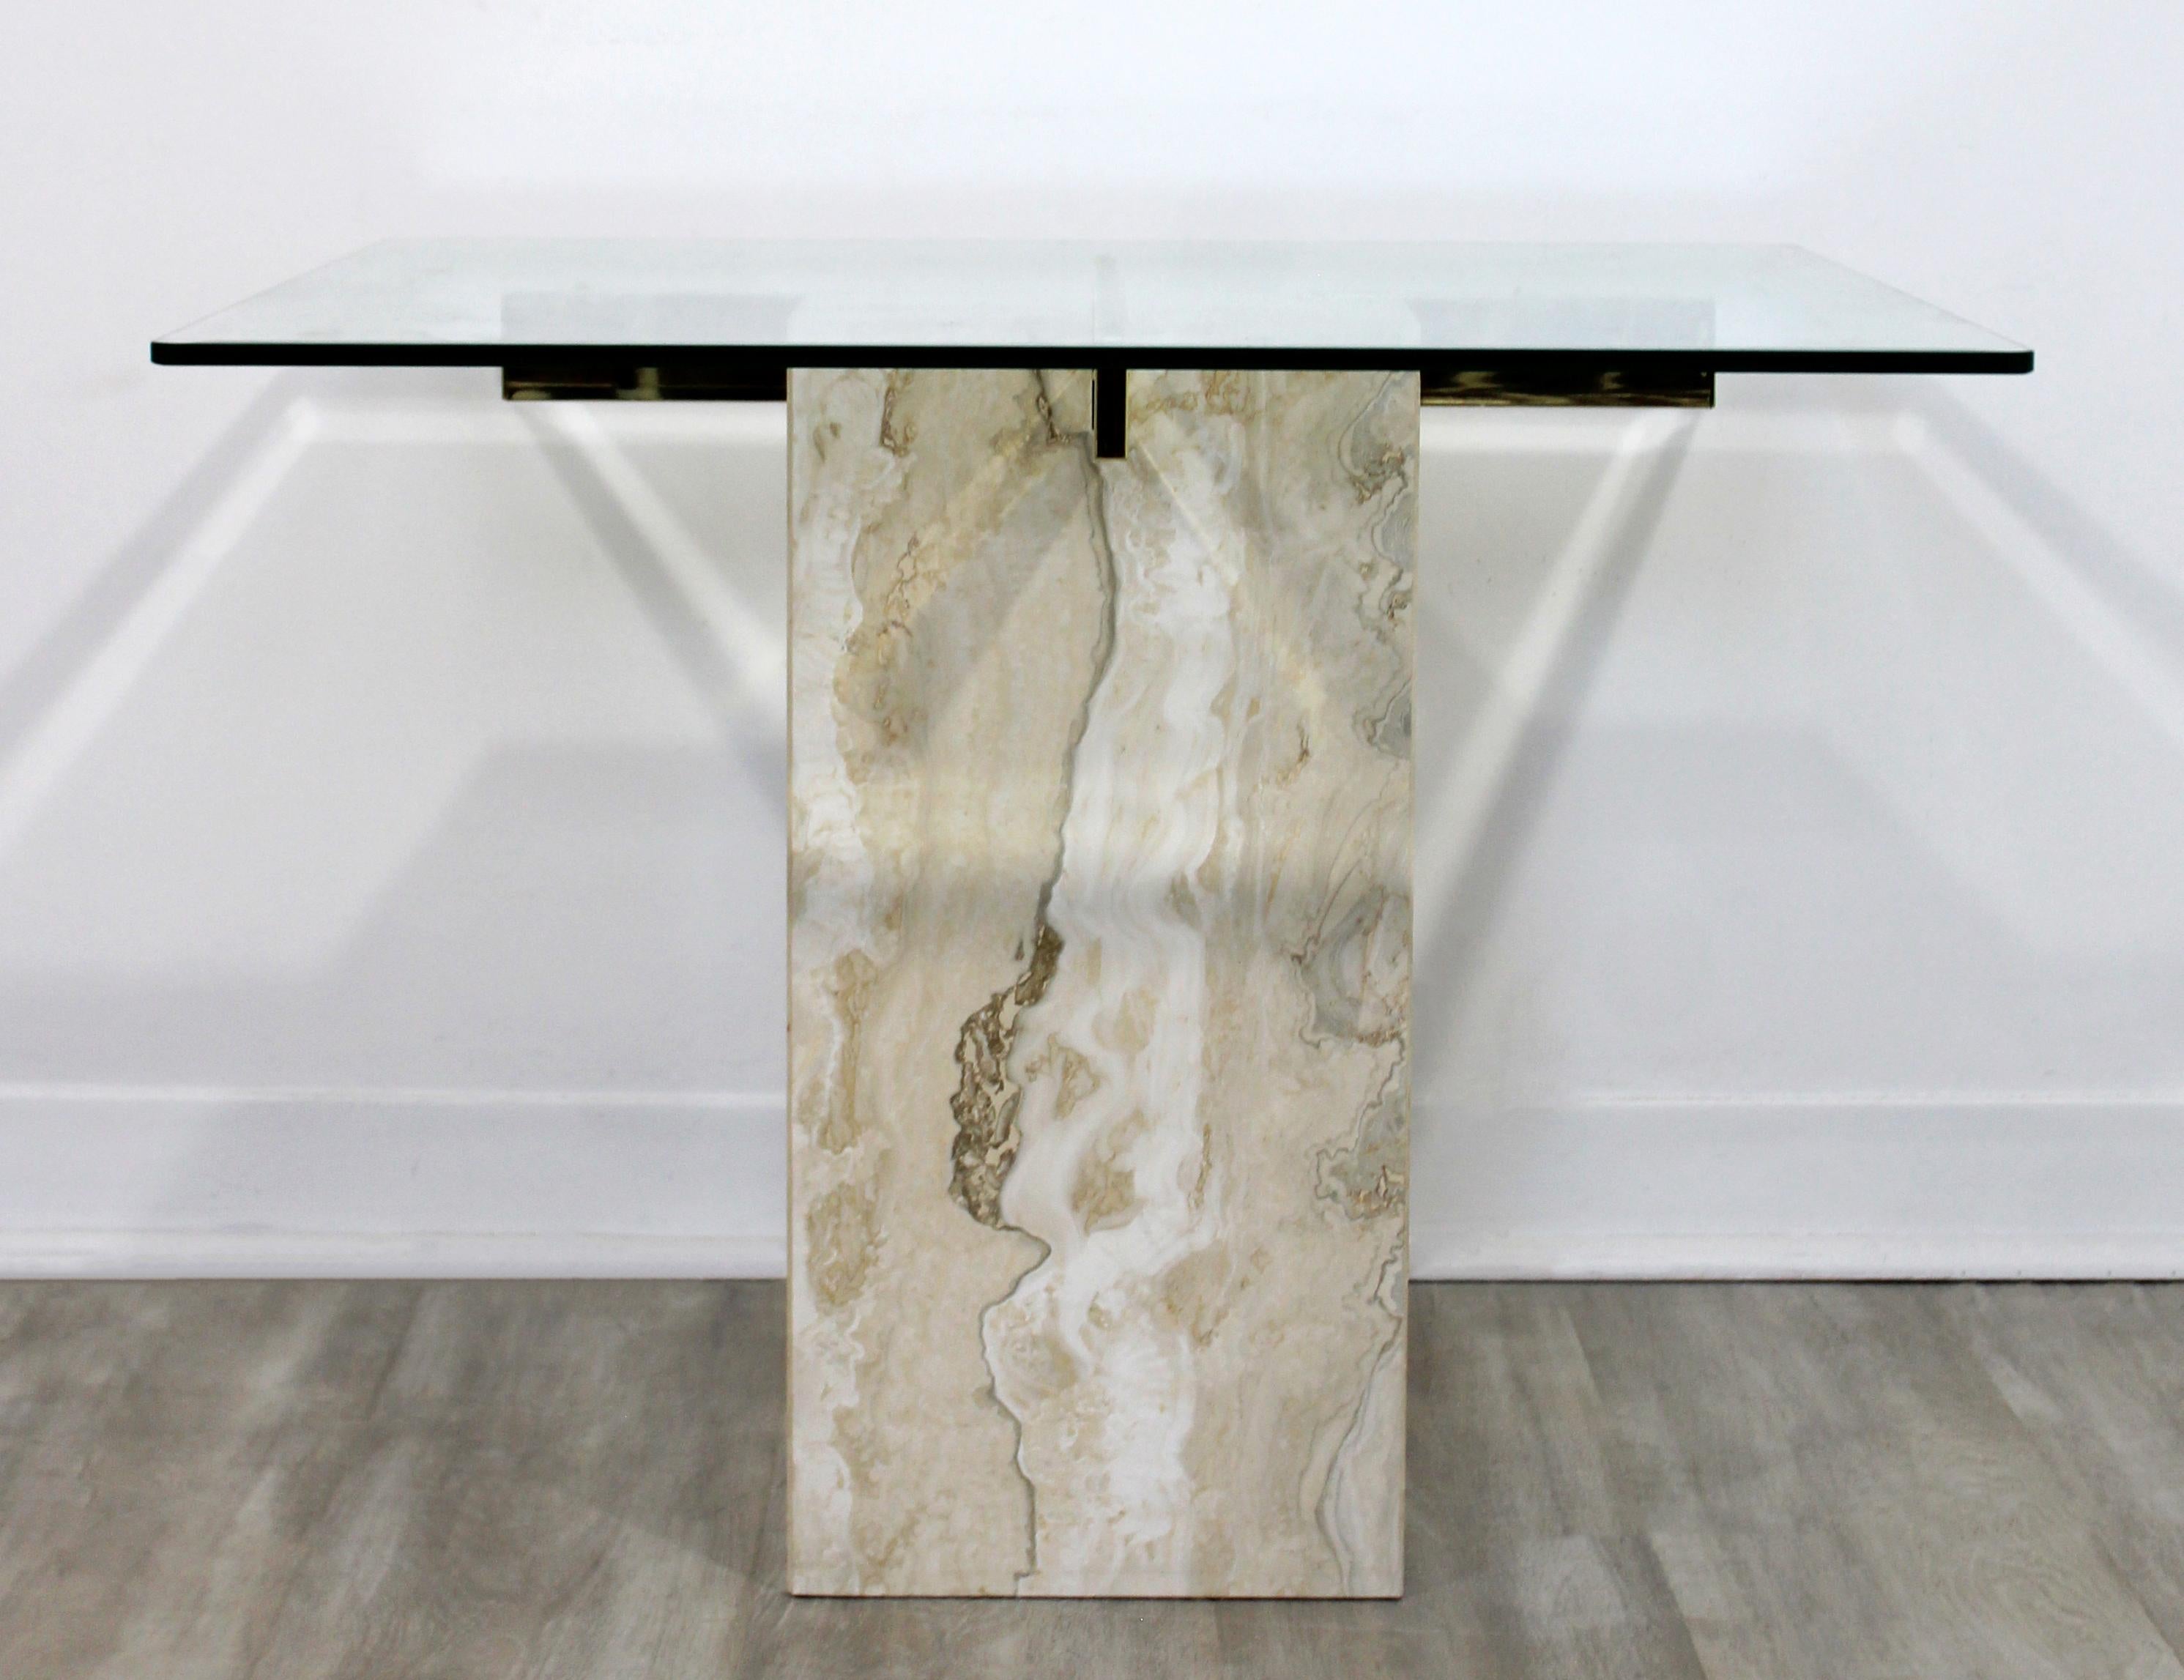 For your consideration is an incredible, square travertine topped side or end table, with brass inserts, by Artedi, made in Italy, circa 1970s. In excellent vintage condition. The dimensions are 27